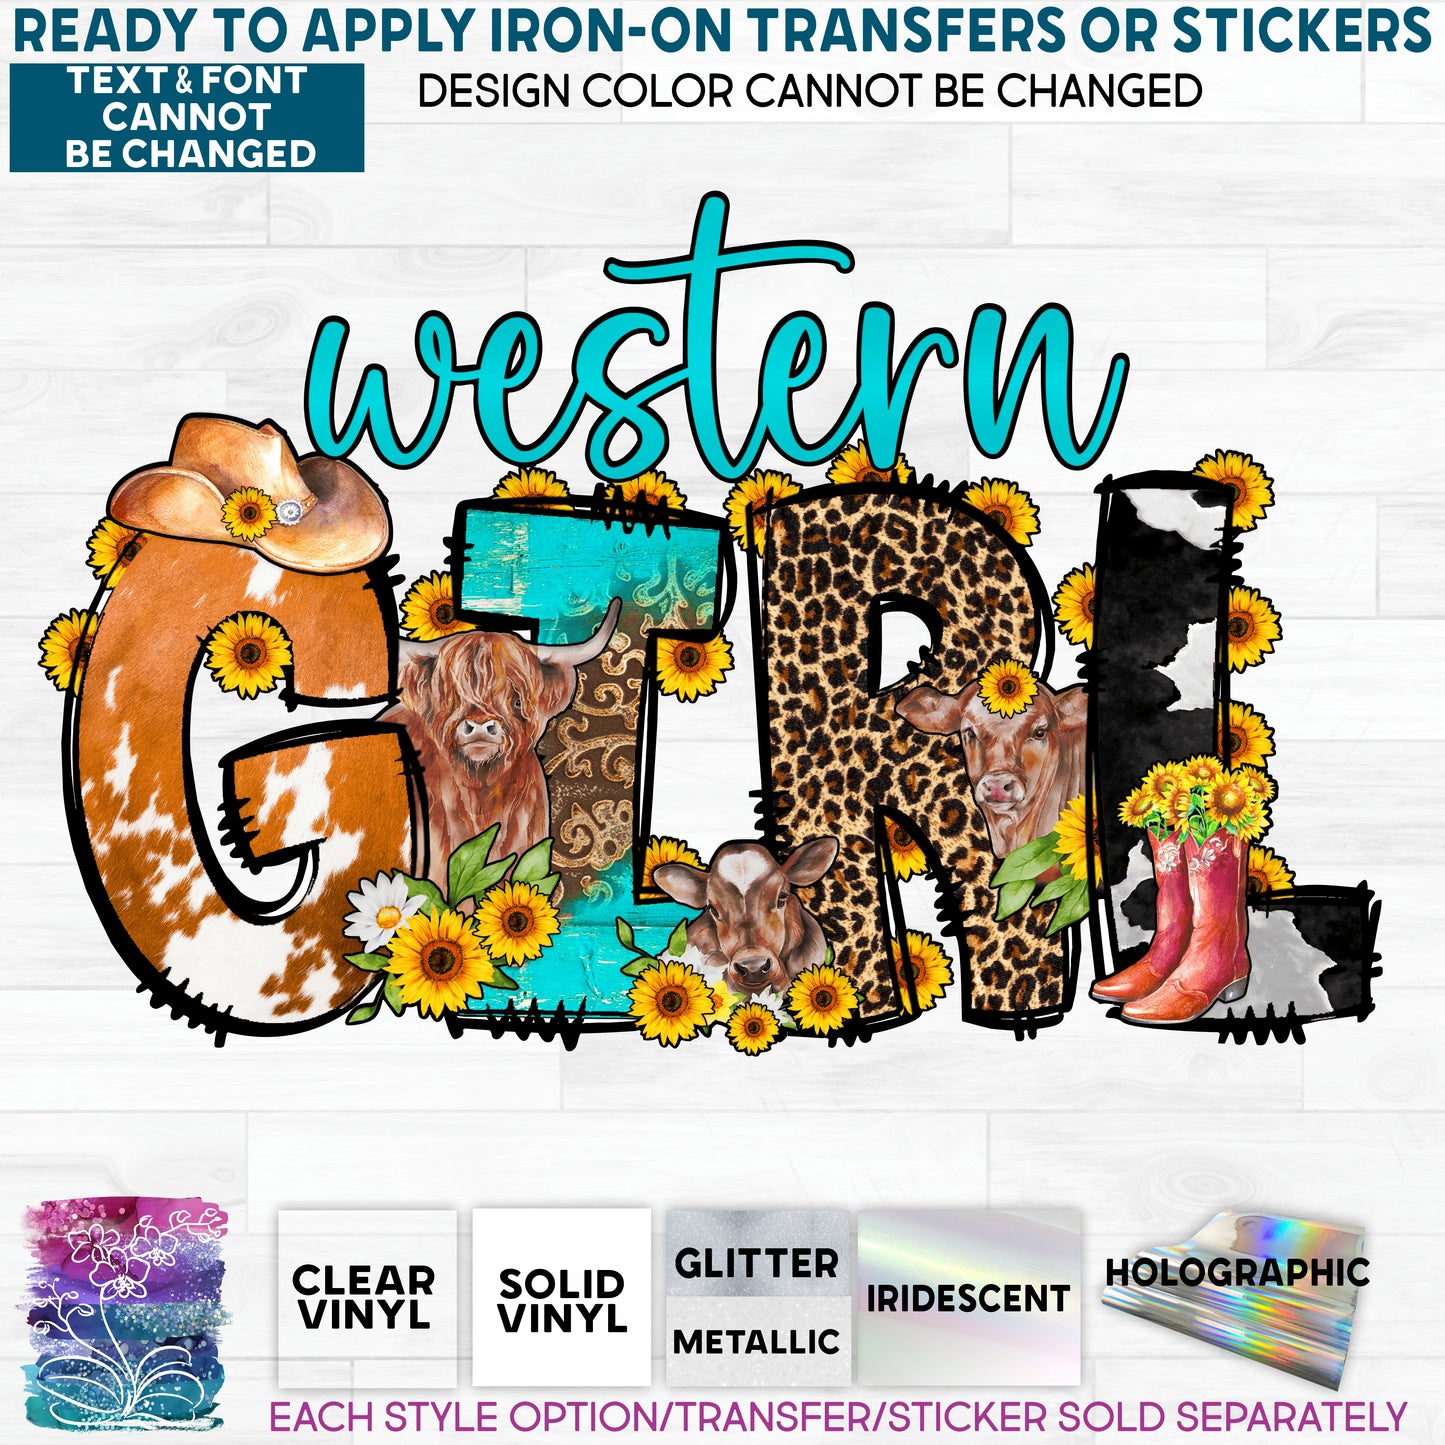 (s036-4B) Western Girl Sunflowers Cow Cowgirl Hat Boots Glitter or Vinyl Iron-On Transfer or Sticker